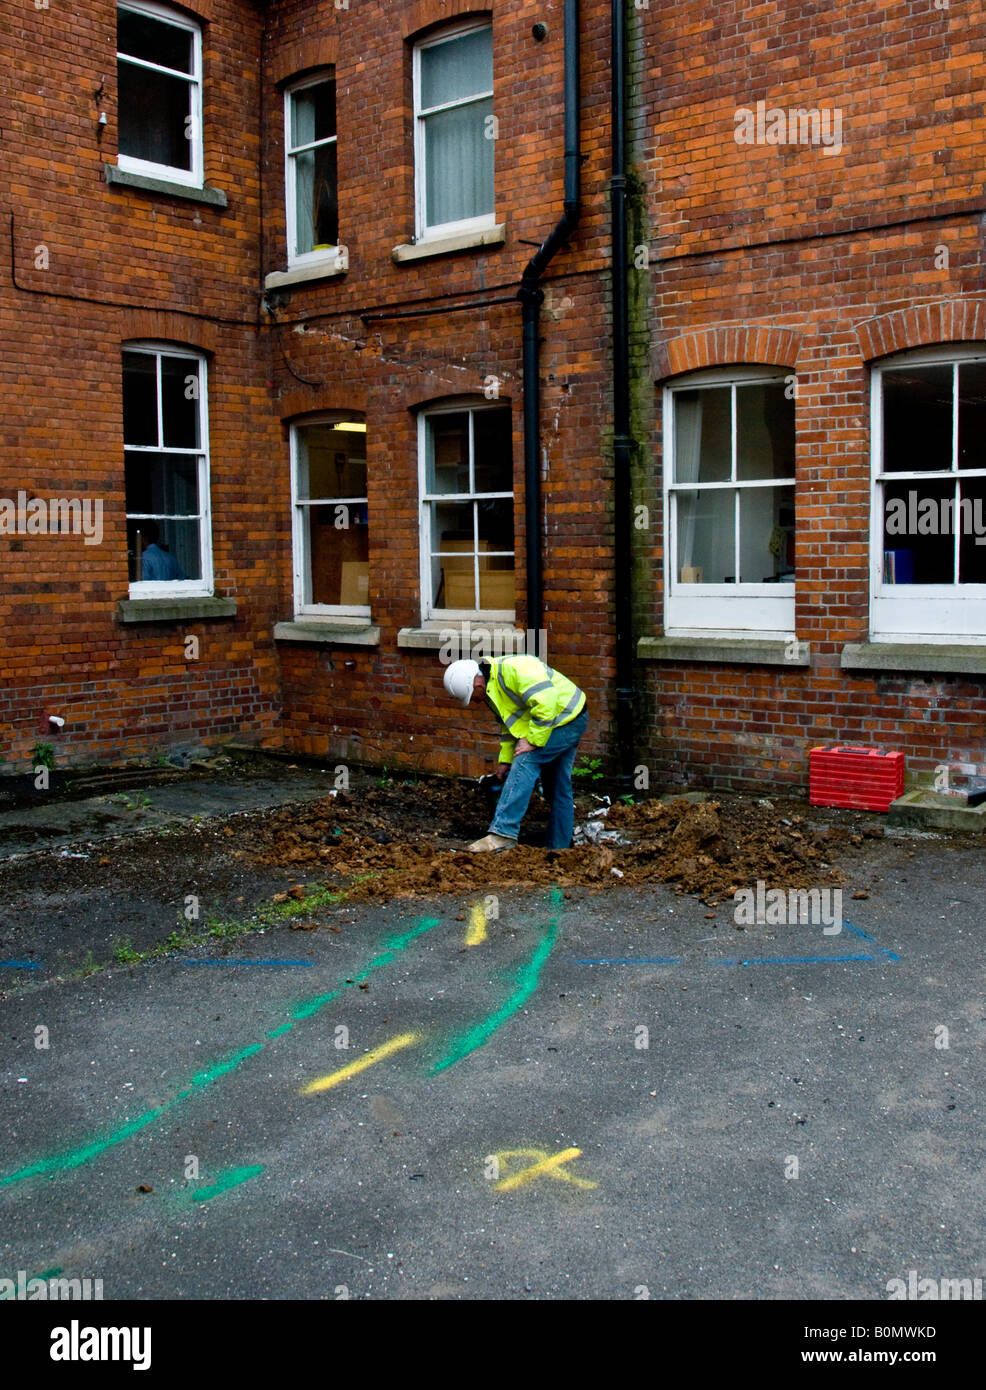 Construction work - Construction worker in hard hat and hi viz jacket digging a hole in the ground. Stock Photo